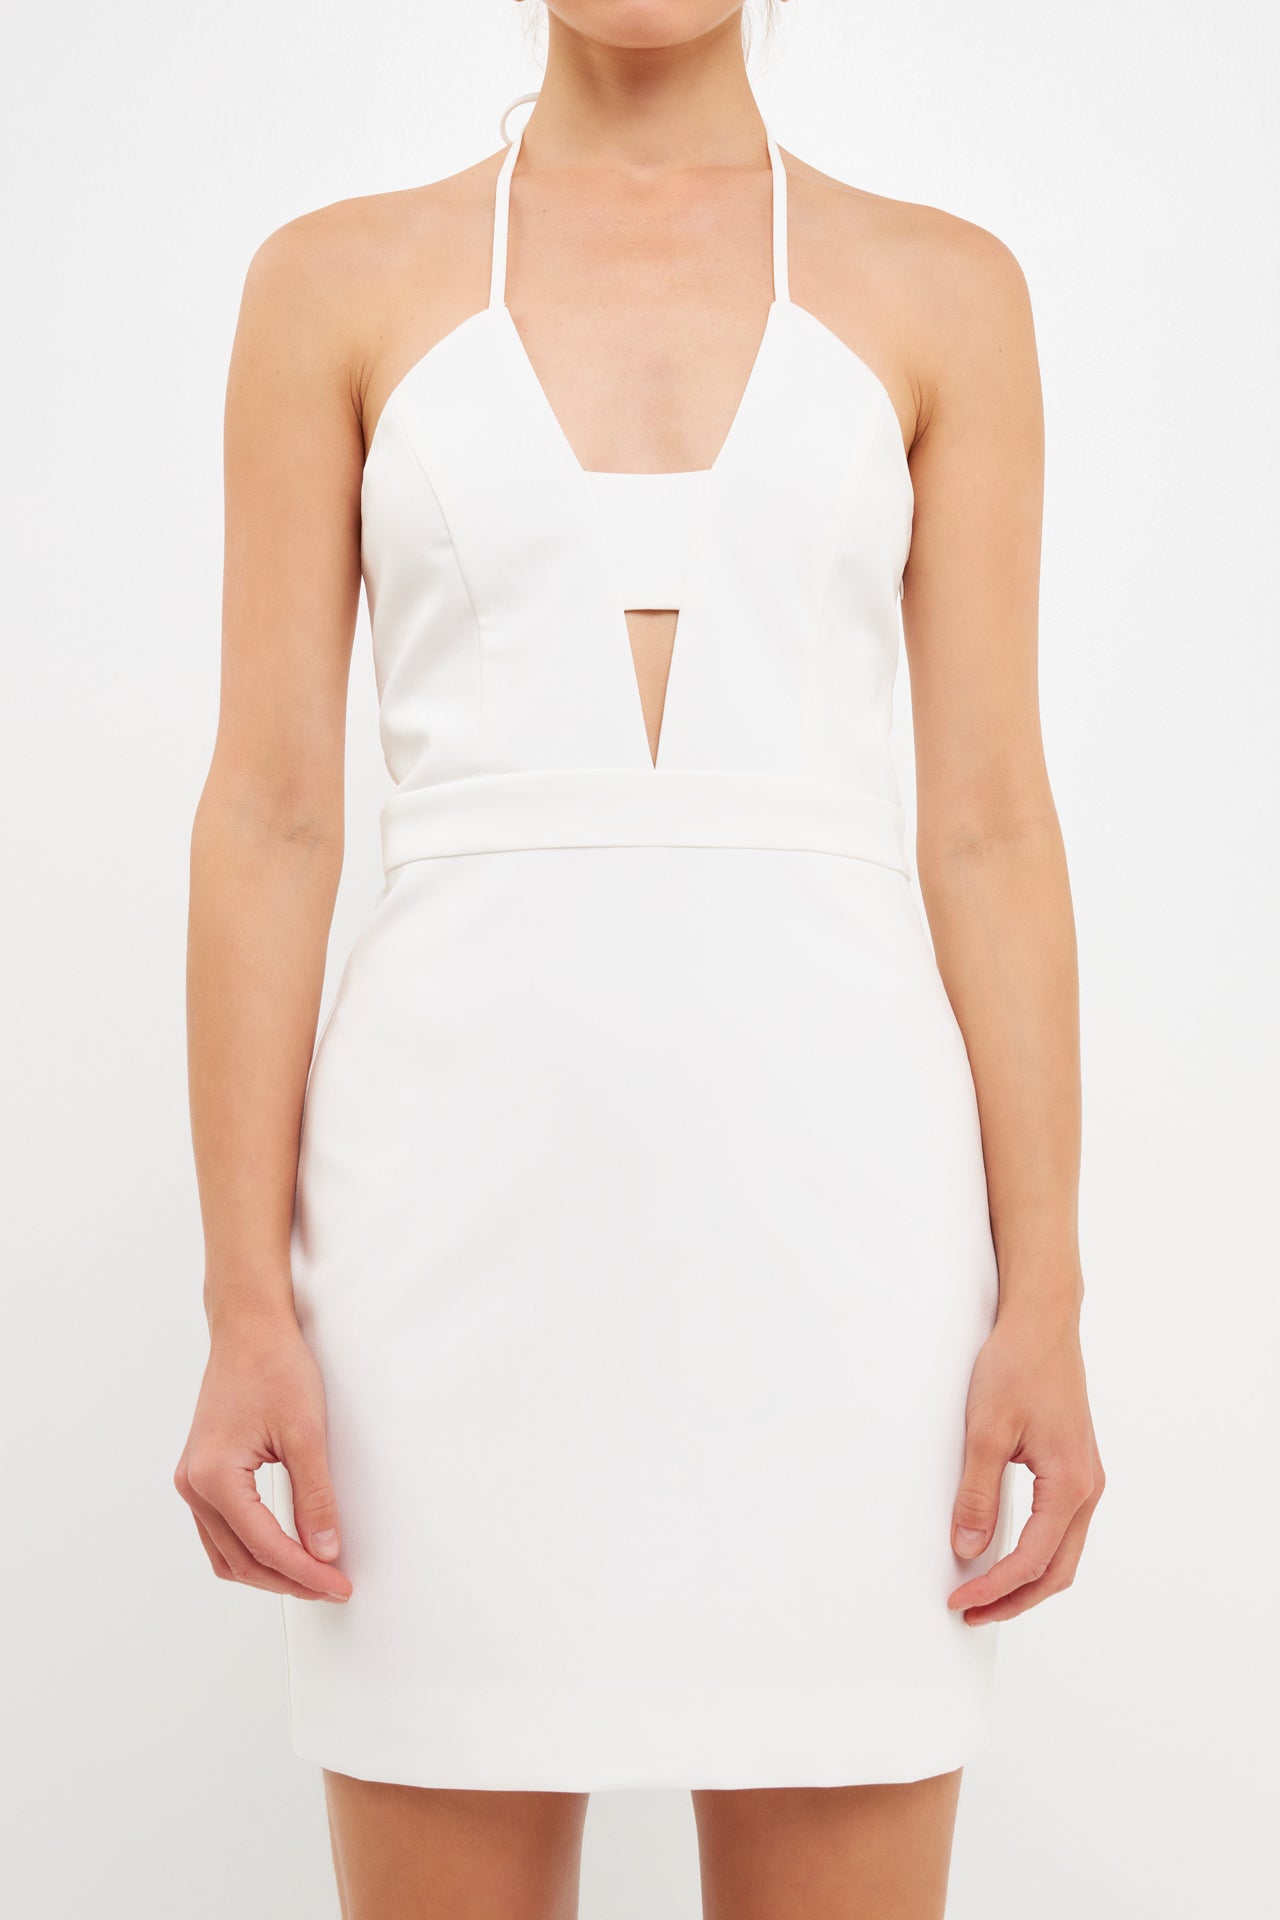 ENDLESS ROSE - Halter Neck Cut Out Mini Dress - DRESSES available at Objectrare